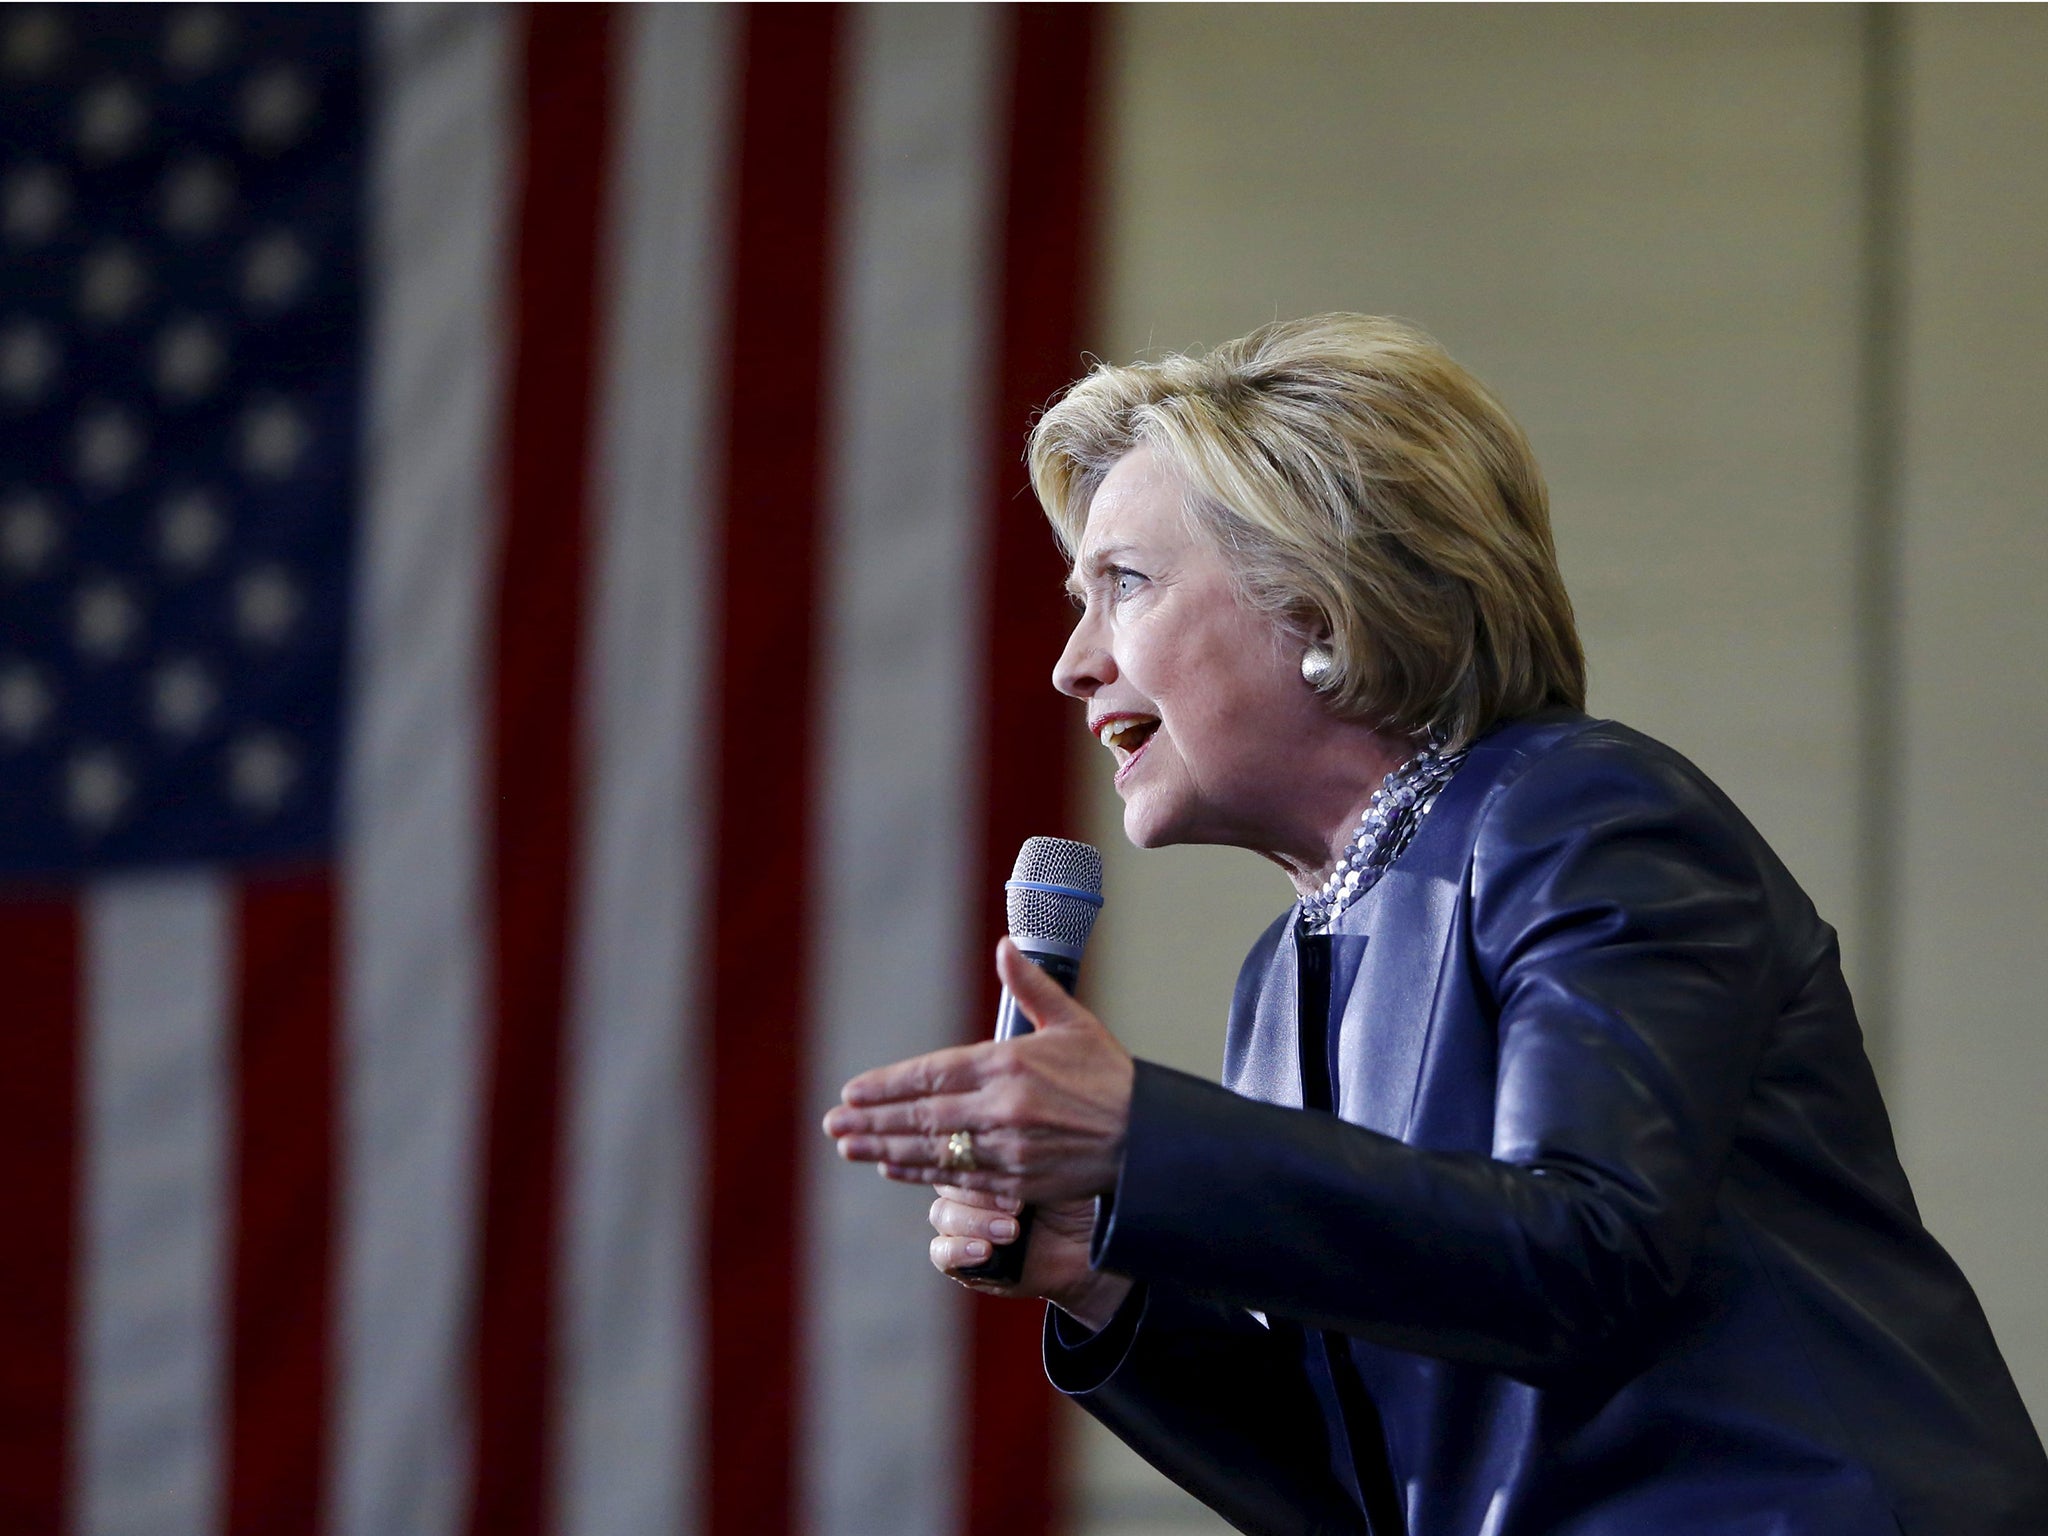 Hillary Clinton speaks during a campaign rally in Central Falls, Rhode Island